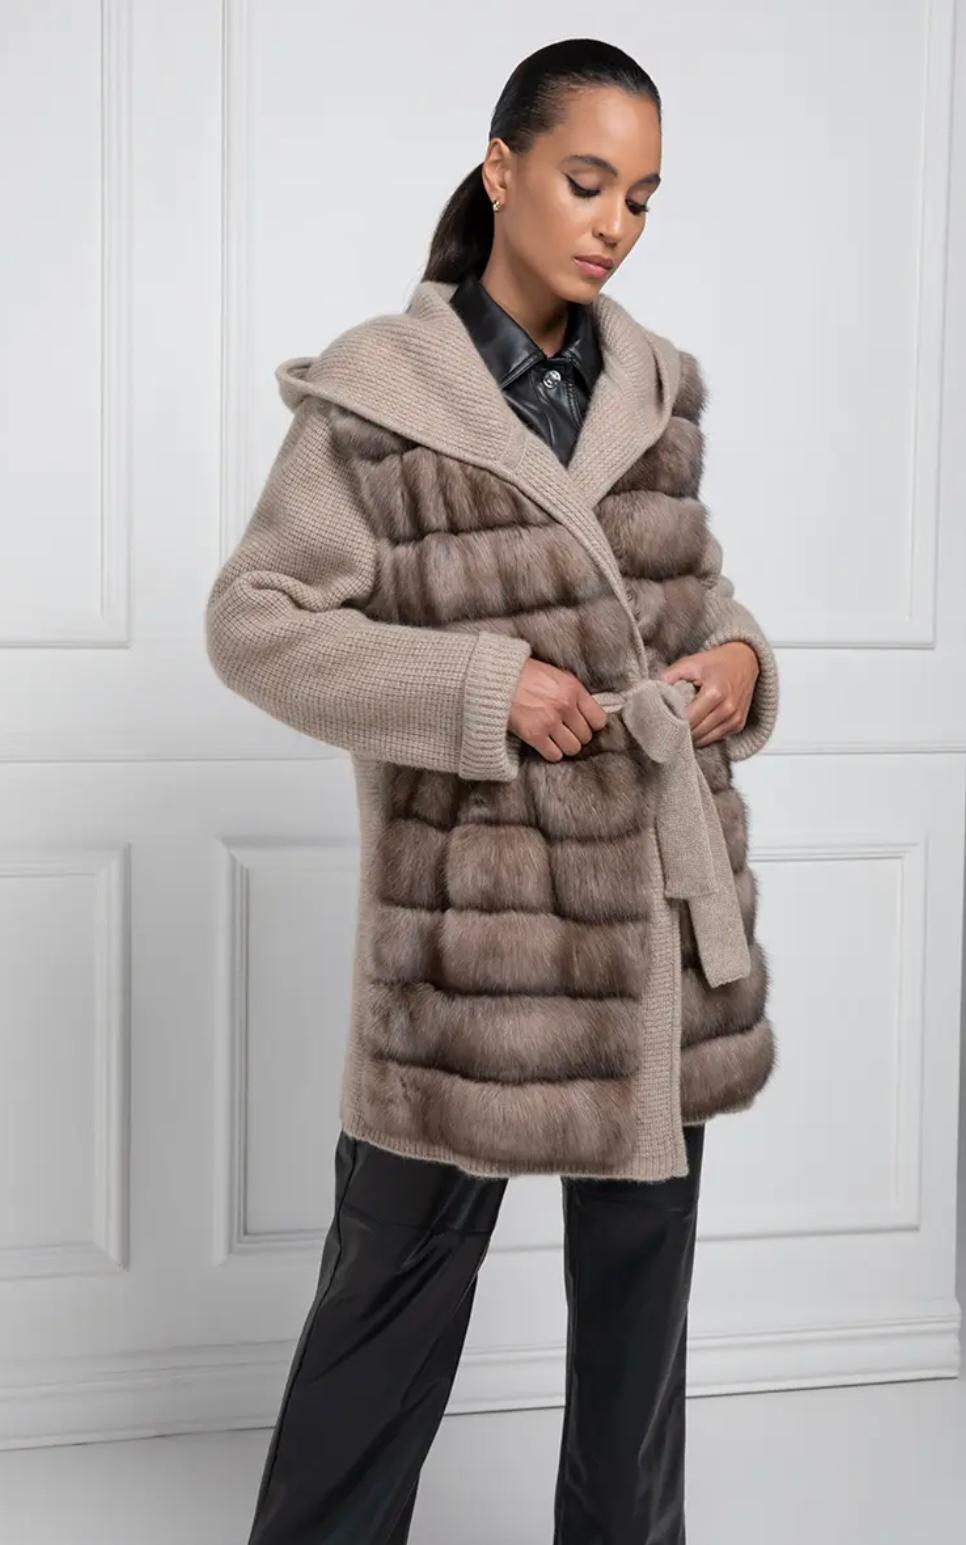 Cashmere Loro Piana with Russian Sable and whole skins. Also this sable Fur, as the most part of the collection, is made using selected the best quality of sable carefully chosen by our laboratories. The type of sable fur used for this coat is